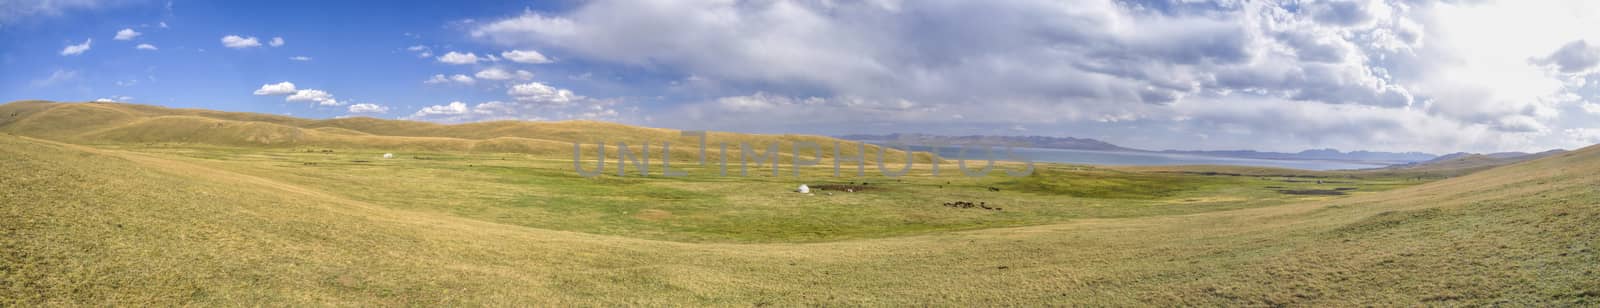 Scenic panorama of green grasslands in Kyrgyzstan with traditional nomadic yurt